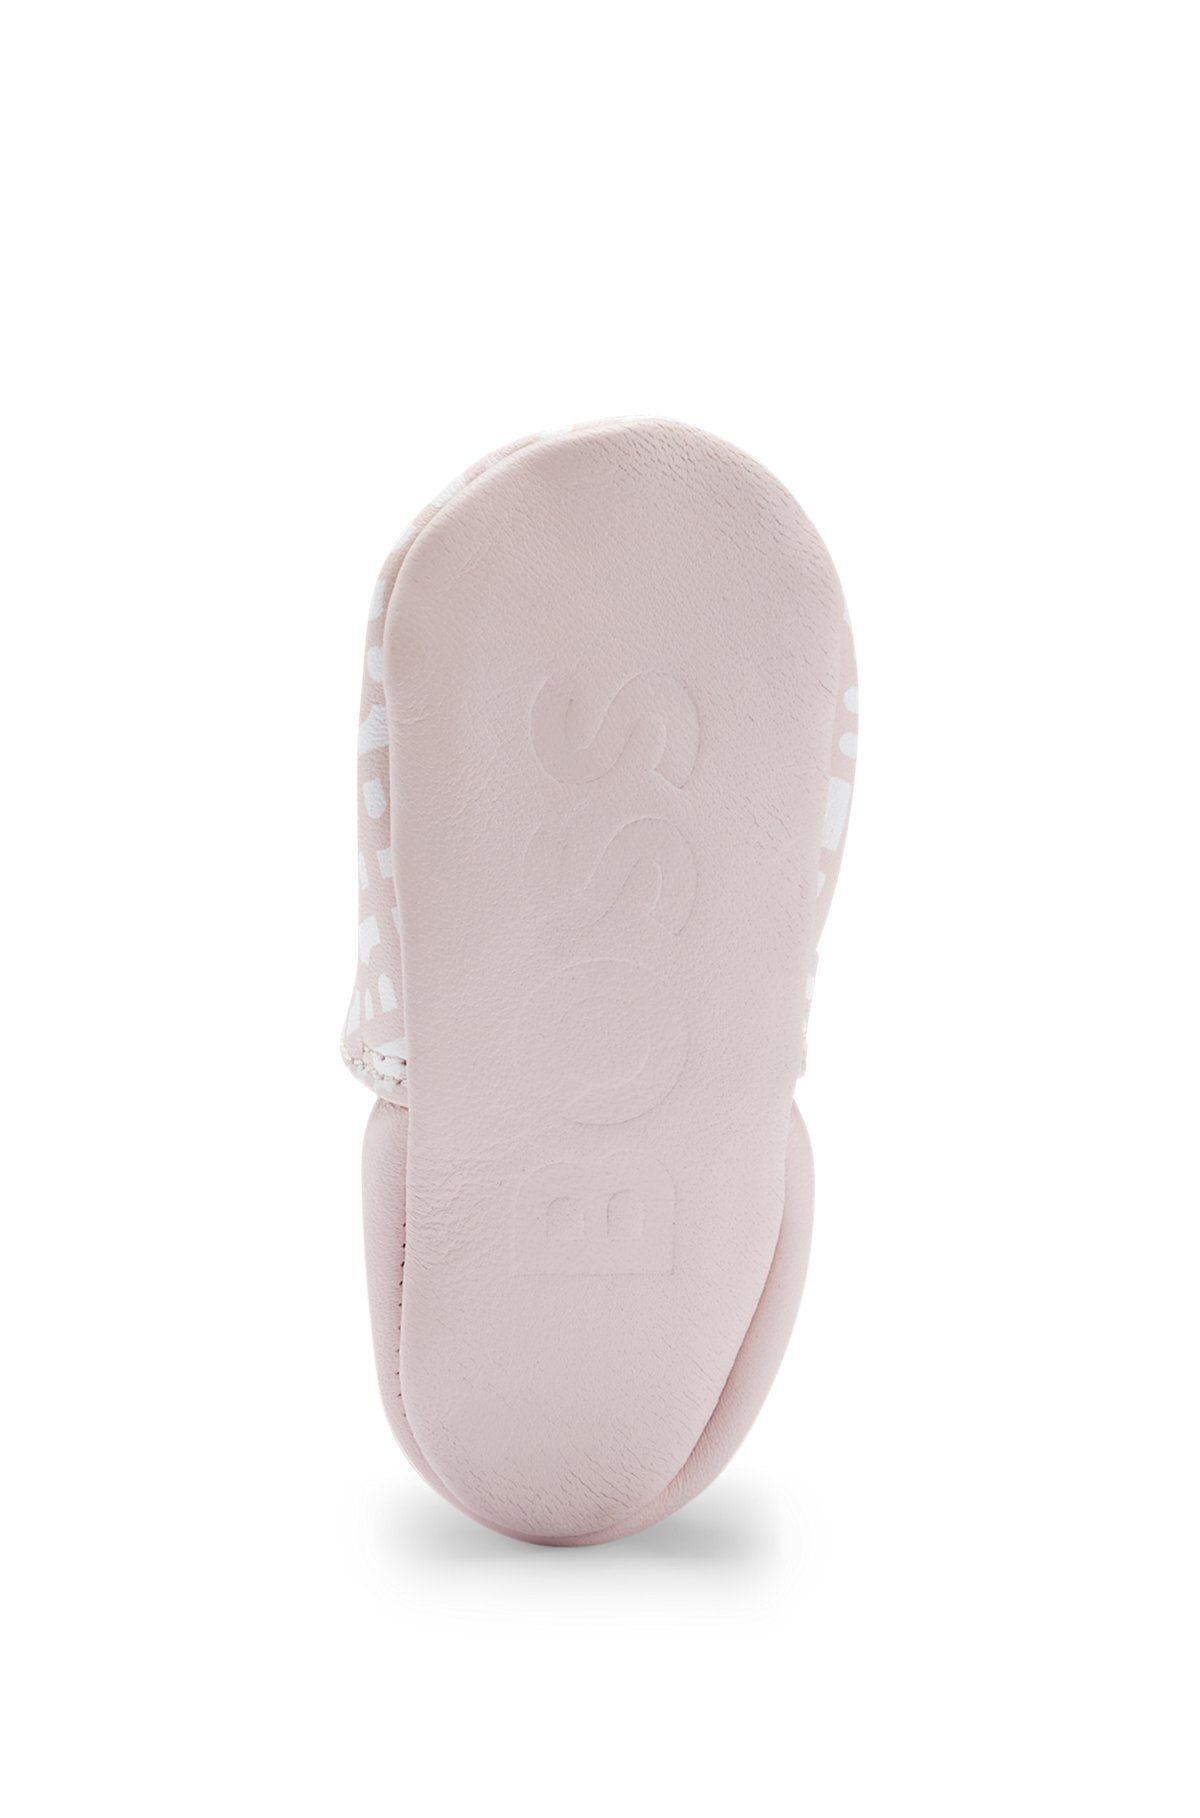 Gift-boxed monogram-print leather slippers for babies, light pink